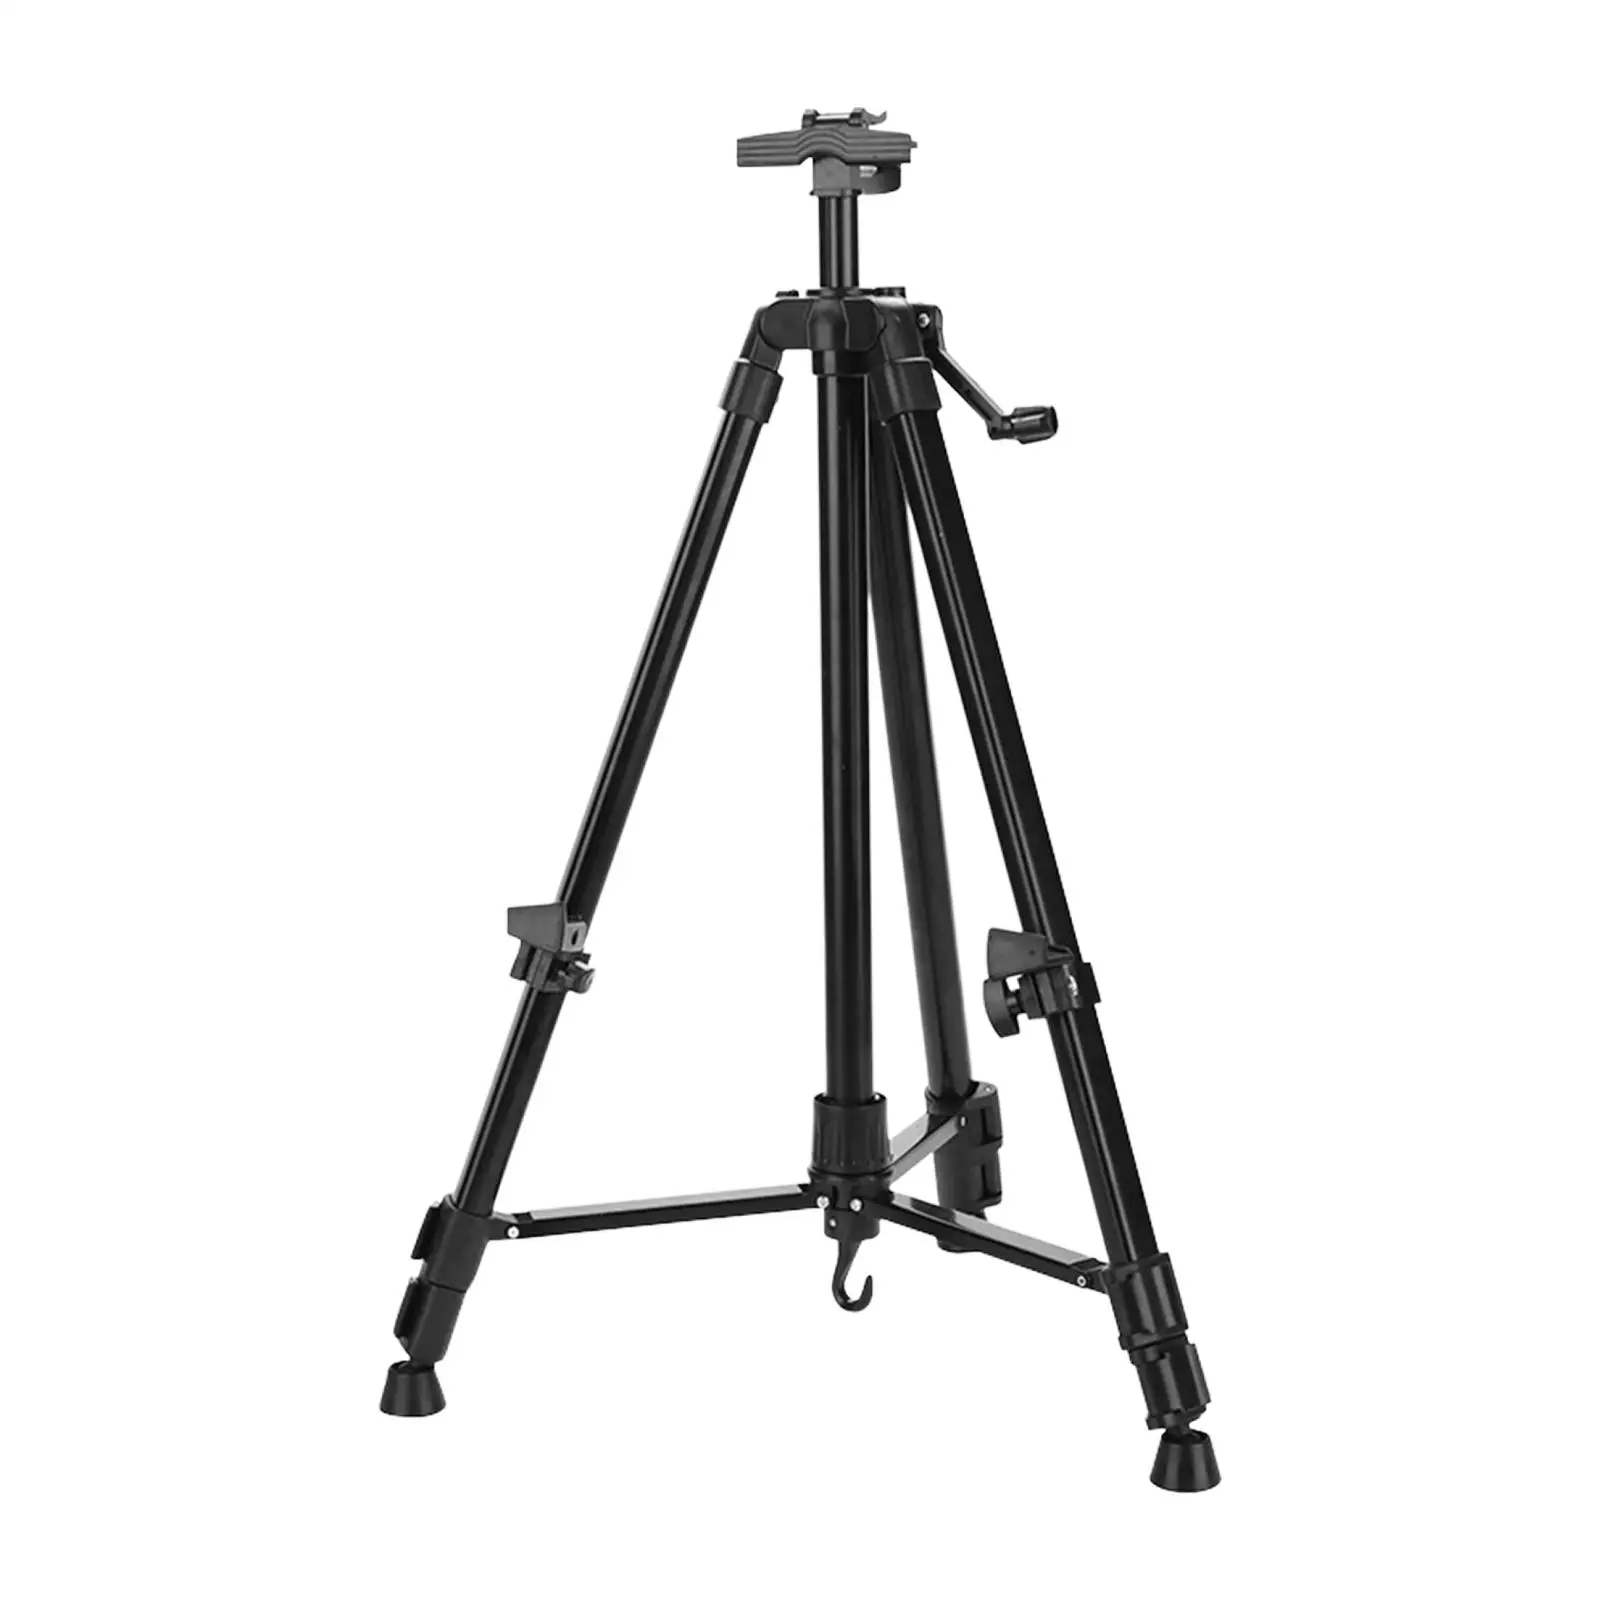 Aluminum Metal Tripod Field Easel Professional Sturdy for Drawing and Displaying Sketch Painting Drawing Stand 60 Inches Tall